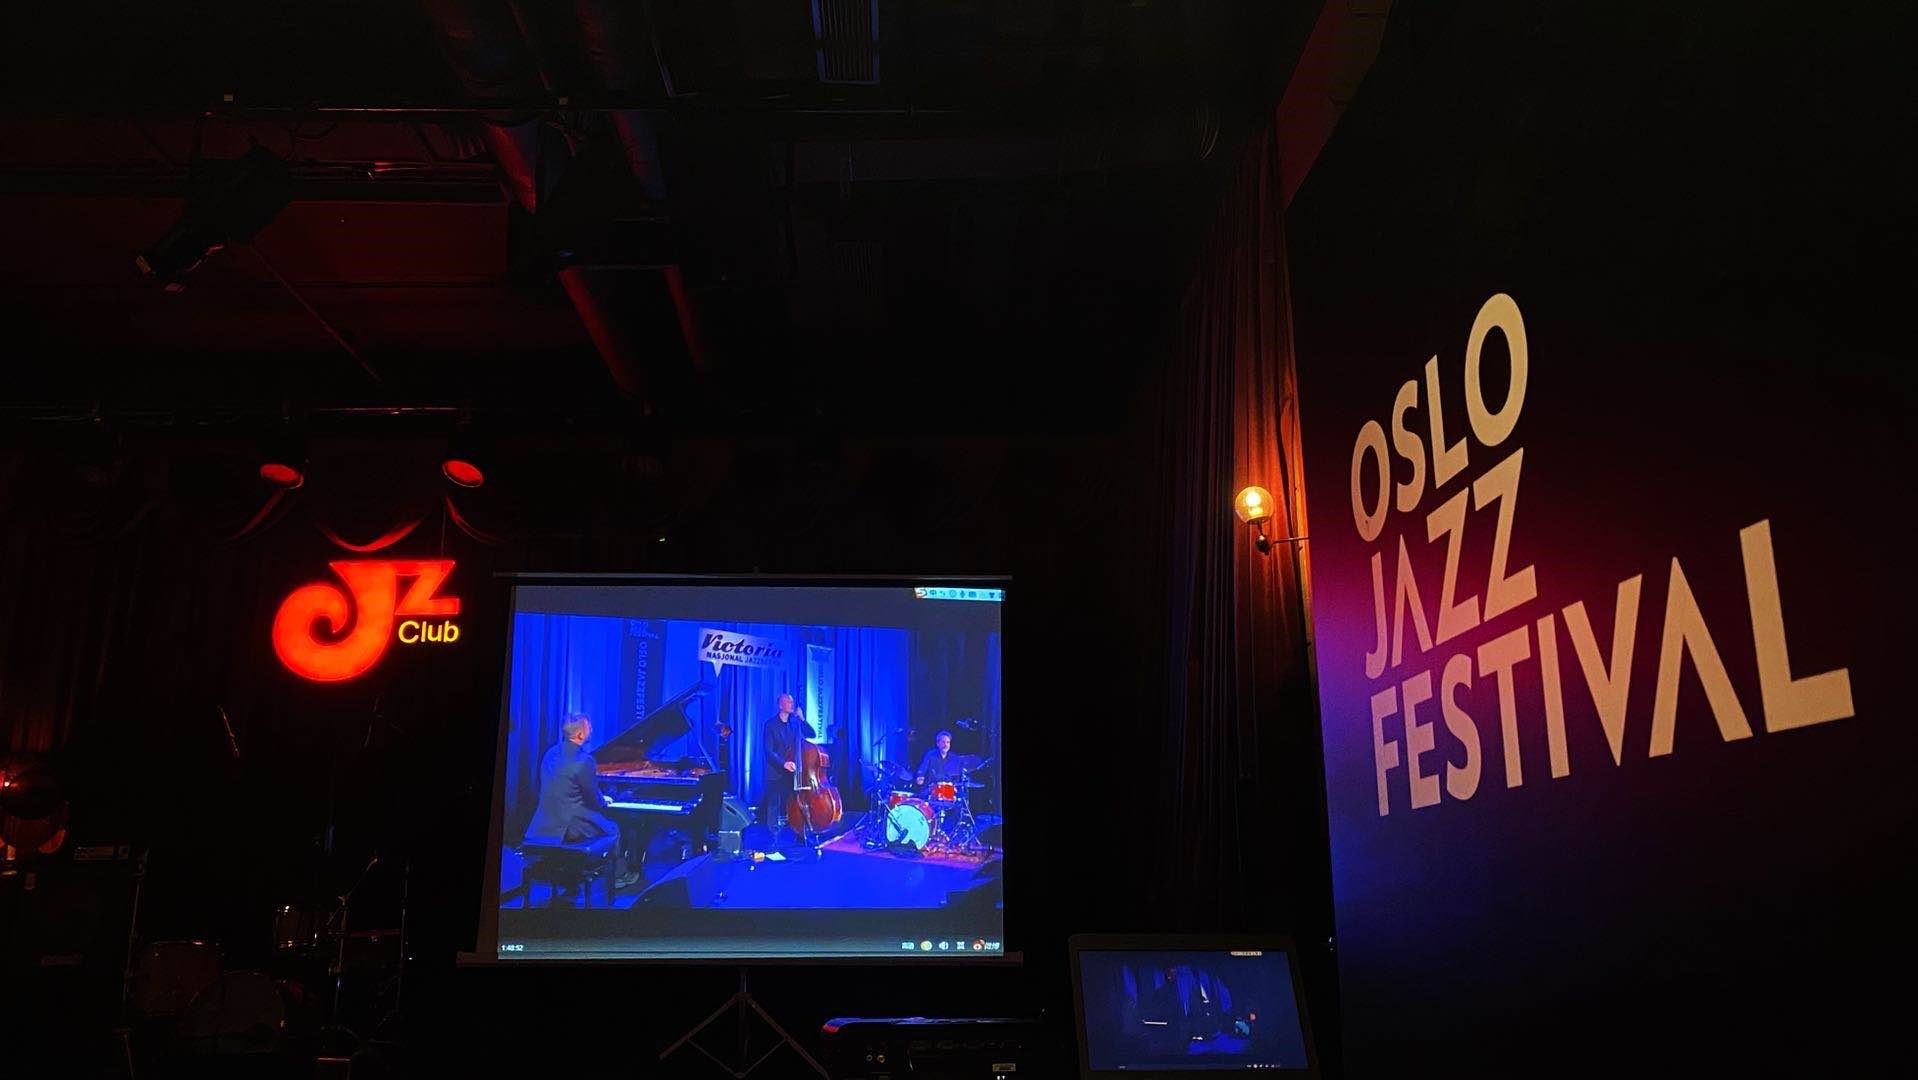 Oslo Jazz Festival online talk and concert